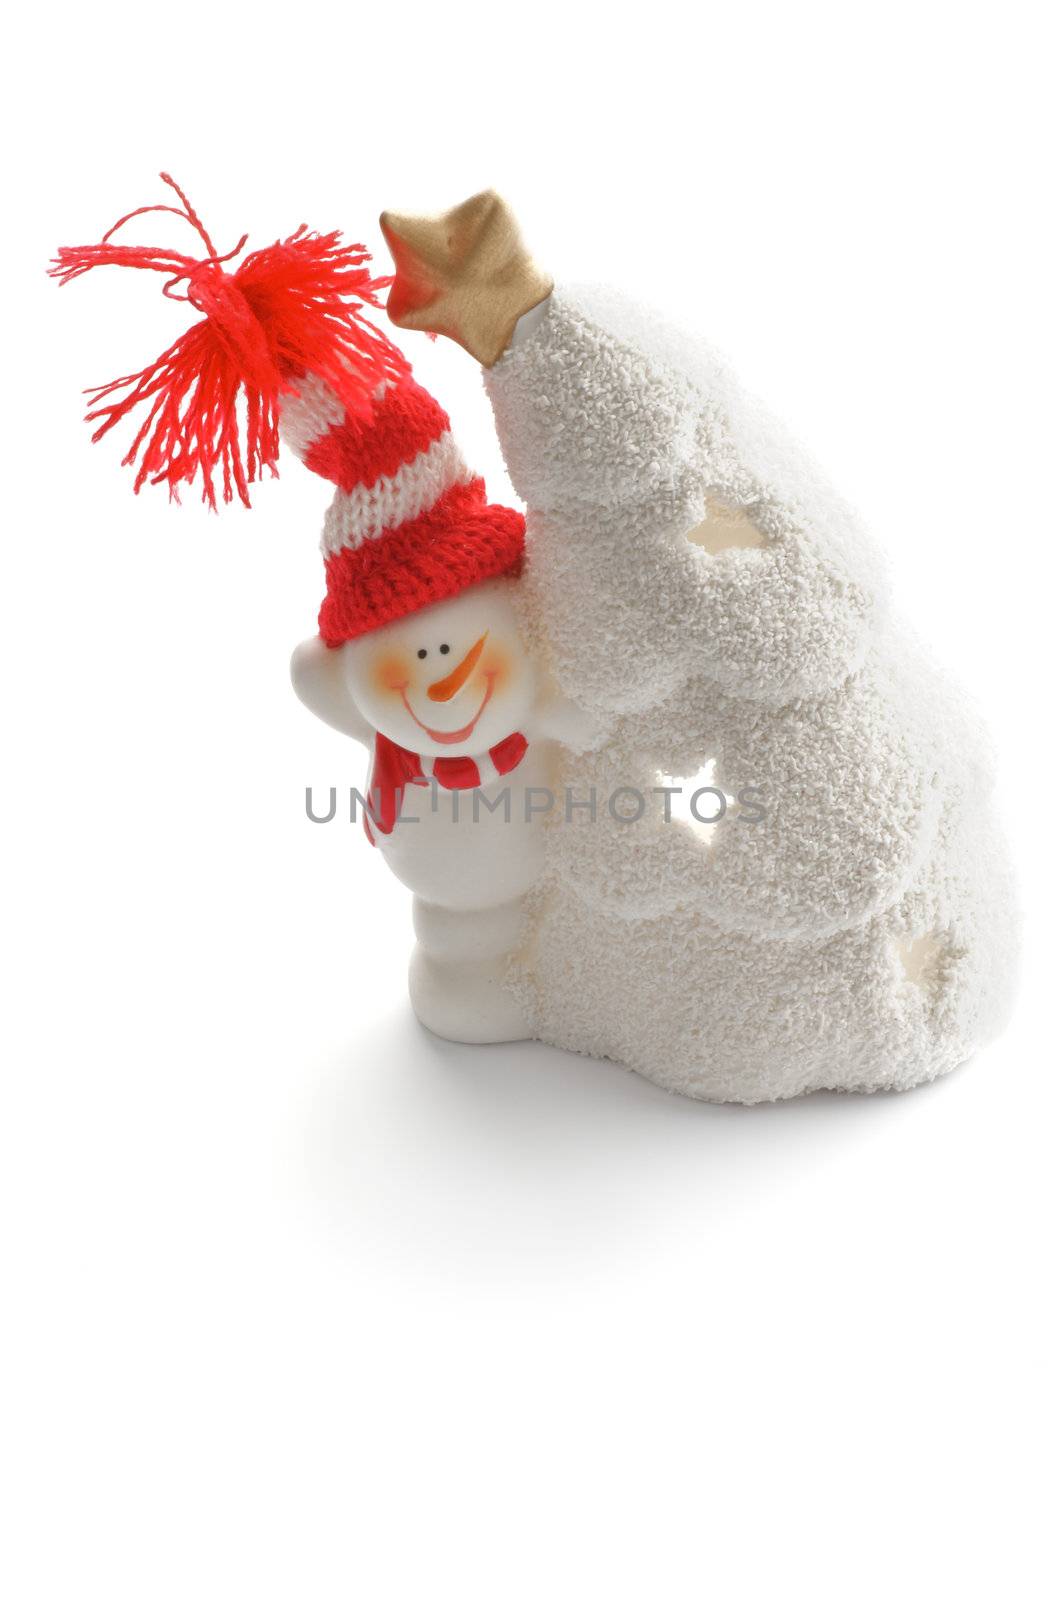 Snowman in Knitted Hat and Snow House as Christmas Decoration closeup on white background